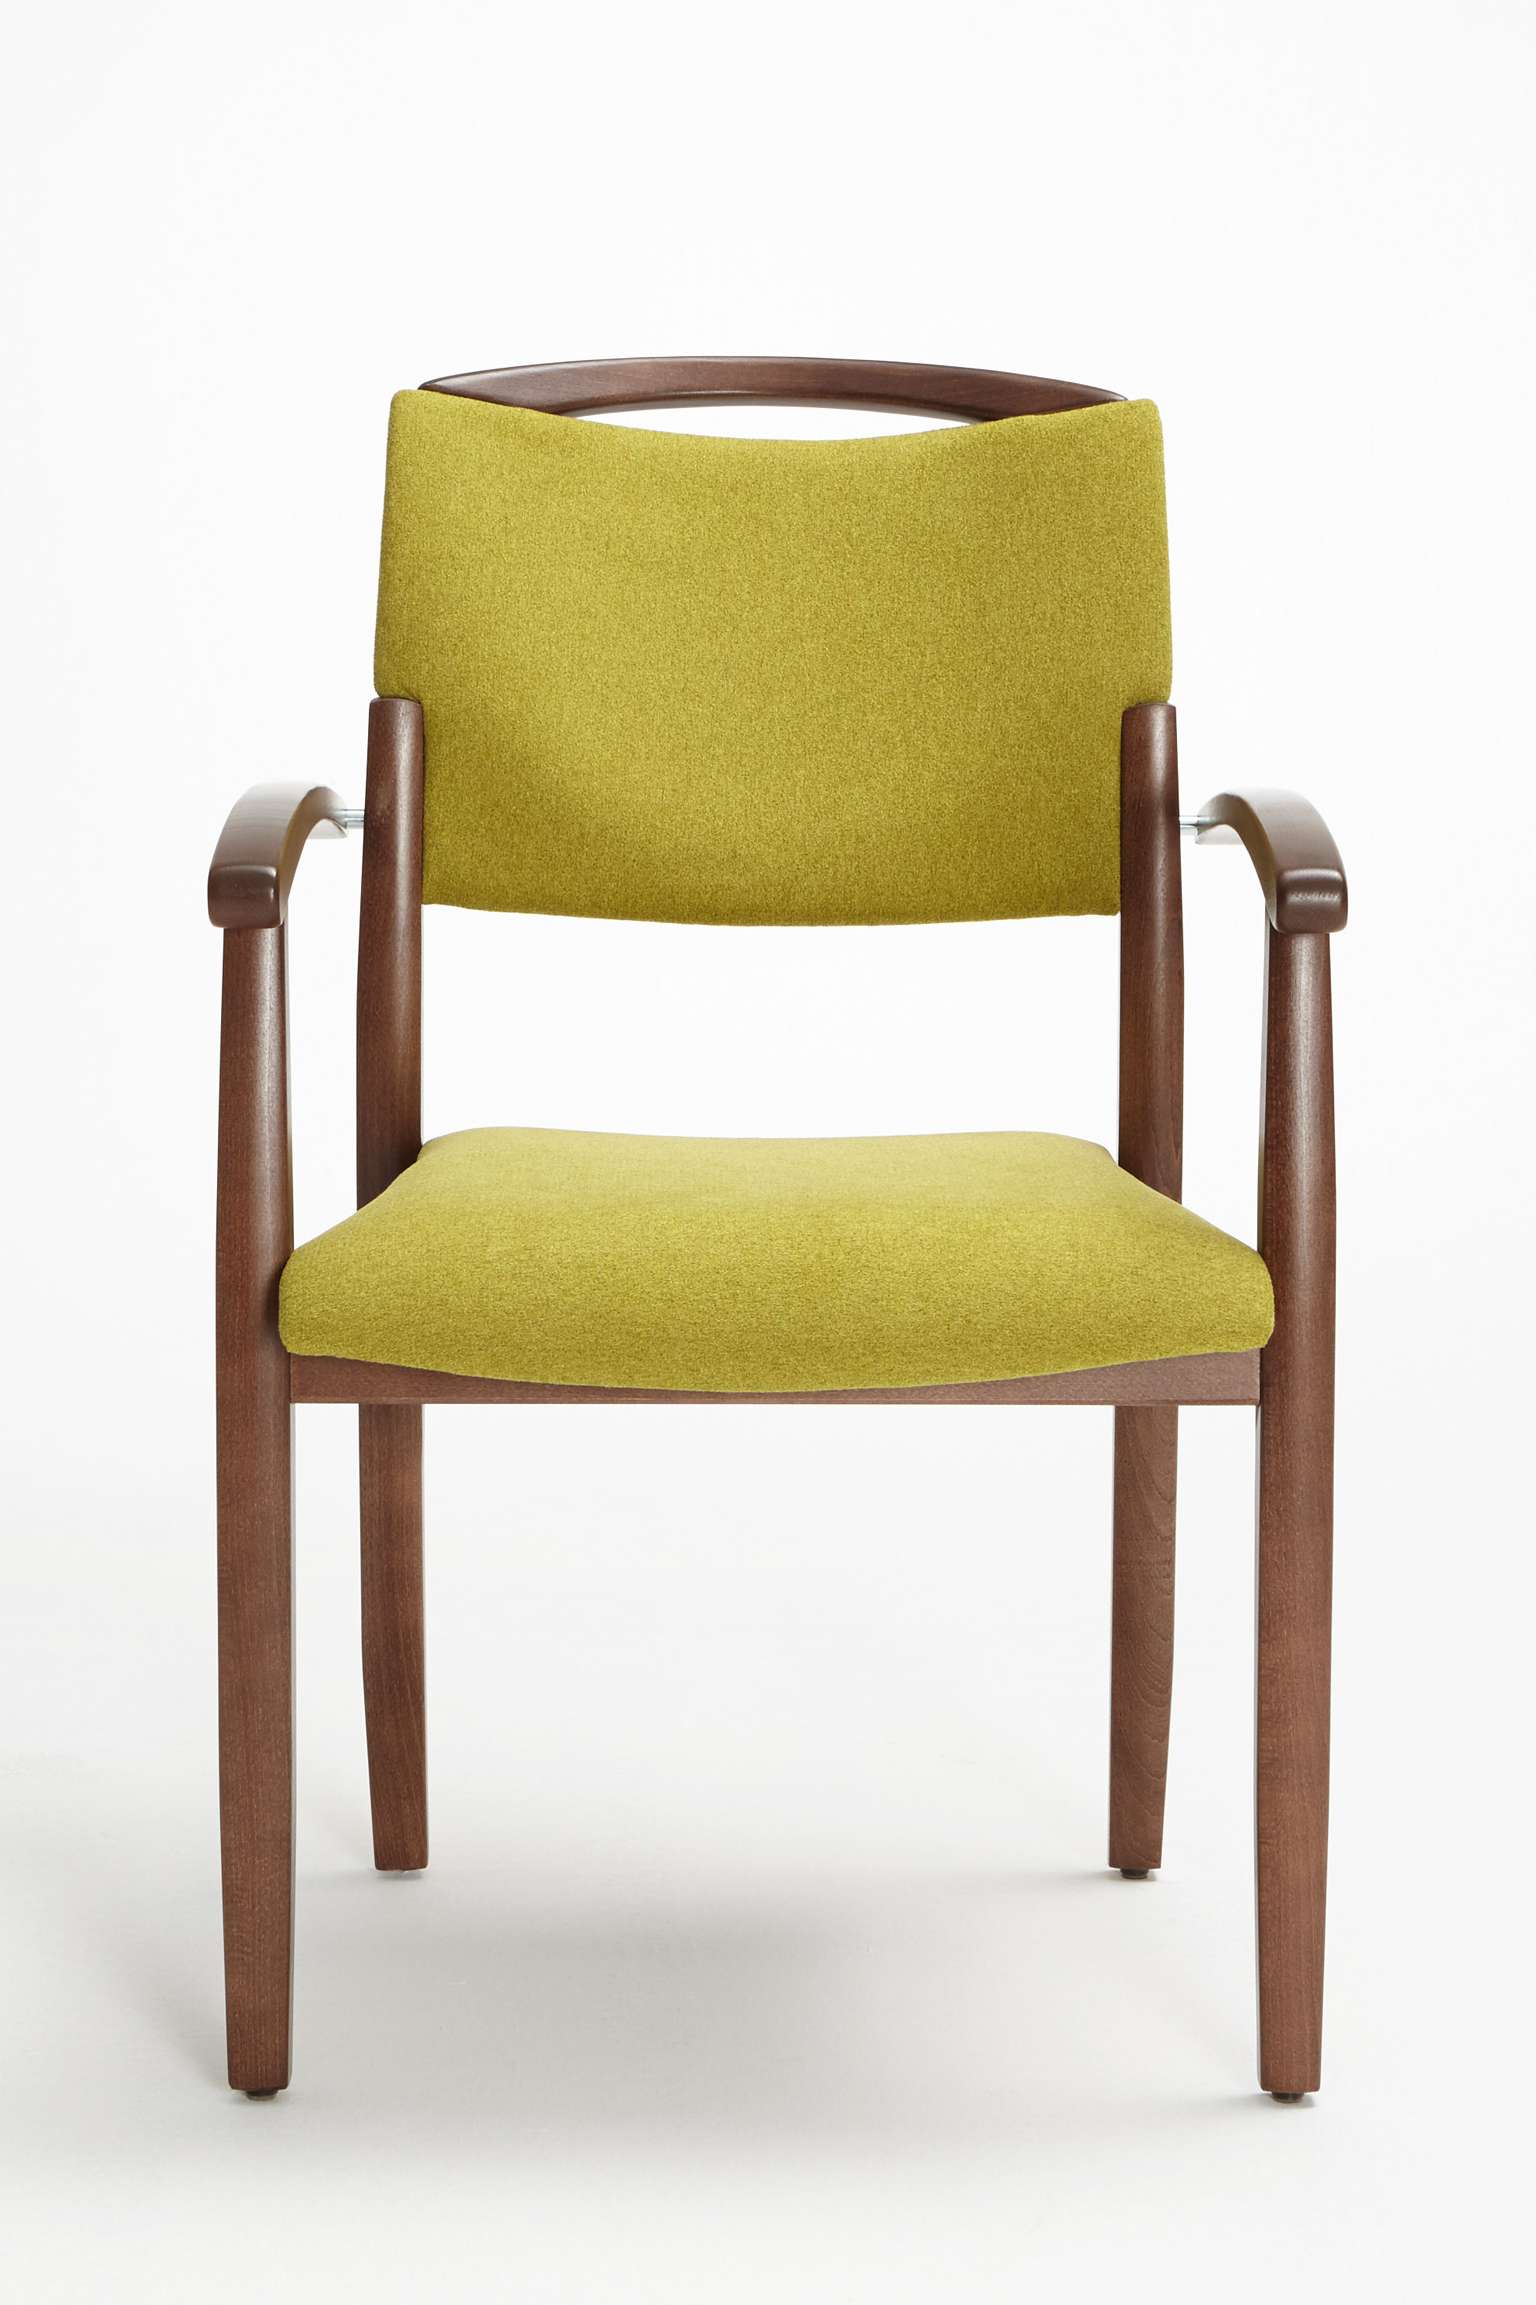 The Fena model as a stackable chair with armrests and handle rail